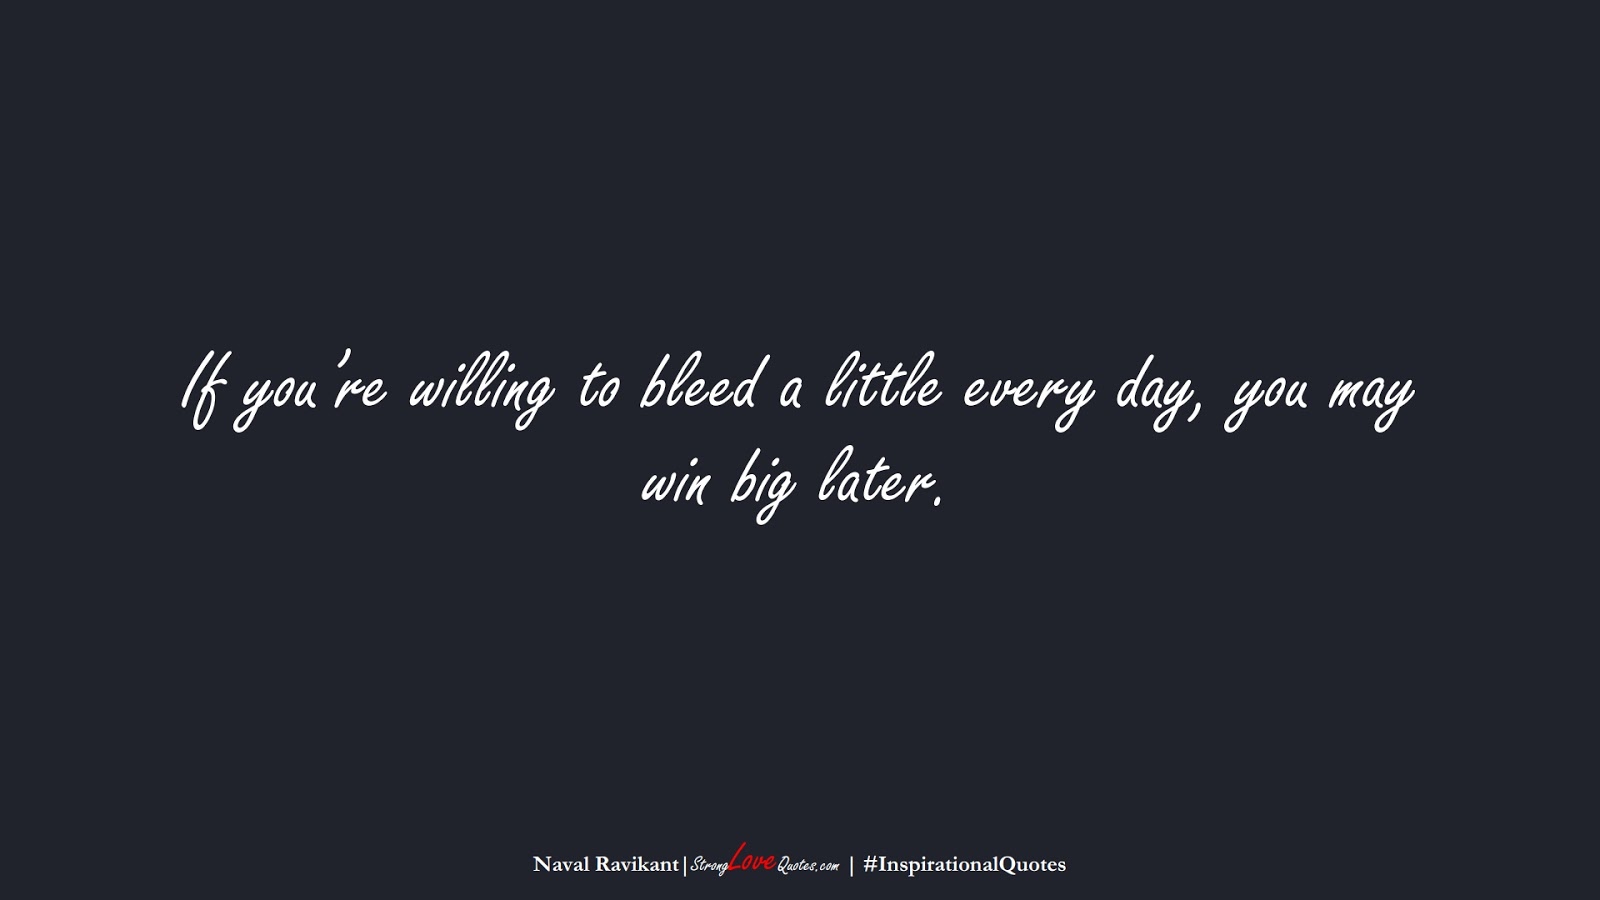 If you’re willing to bleed a little every day, you may win big later. (Naval Ravikant);  #InspirationalQuotes